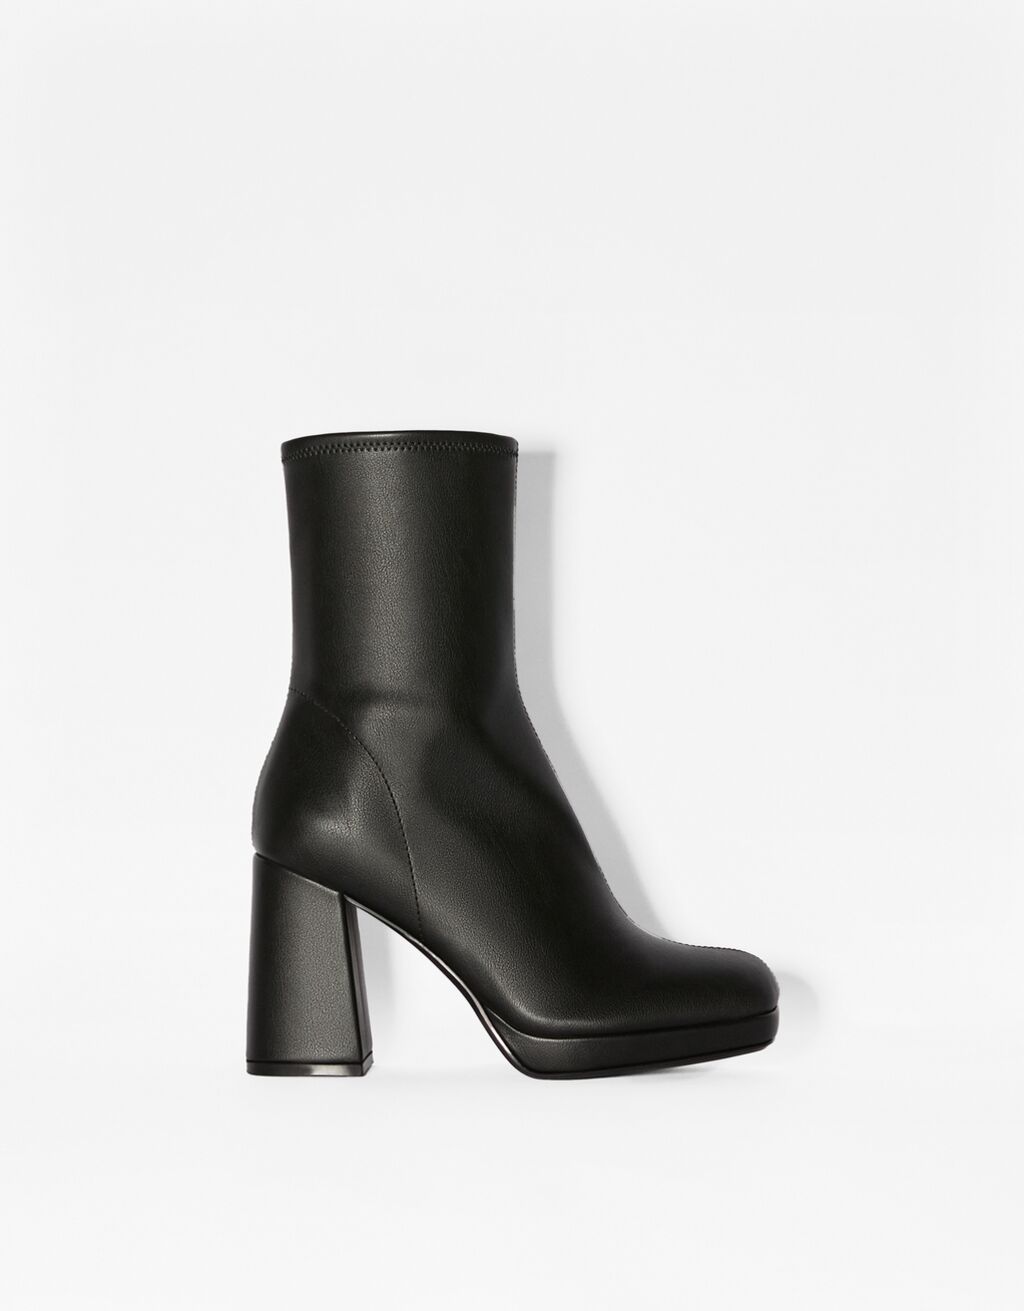 Fitted high-heel mini platform ankle boots.